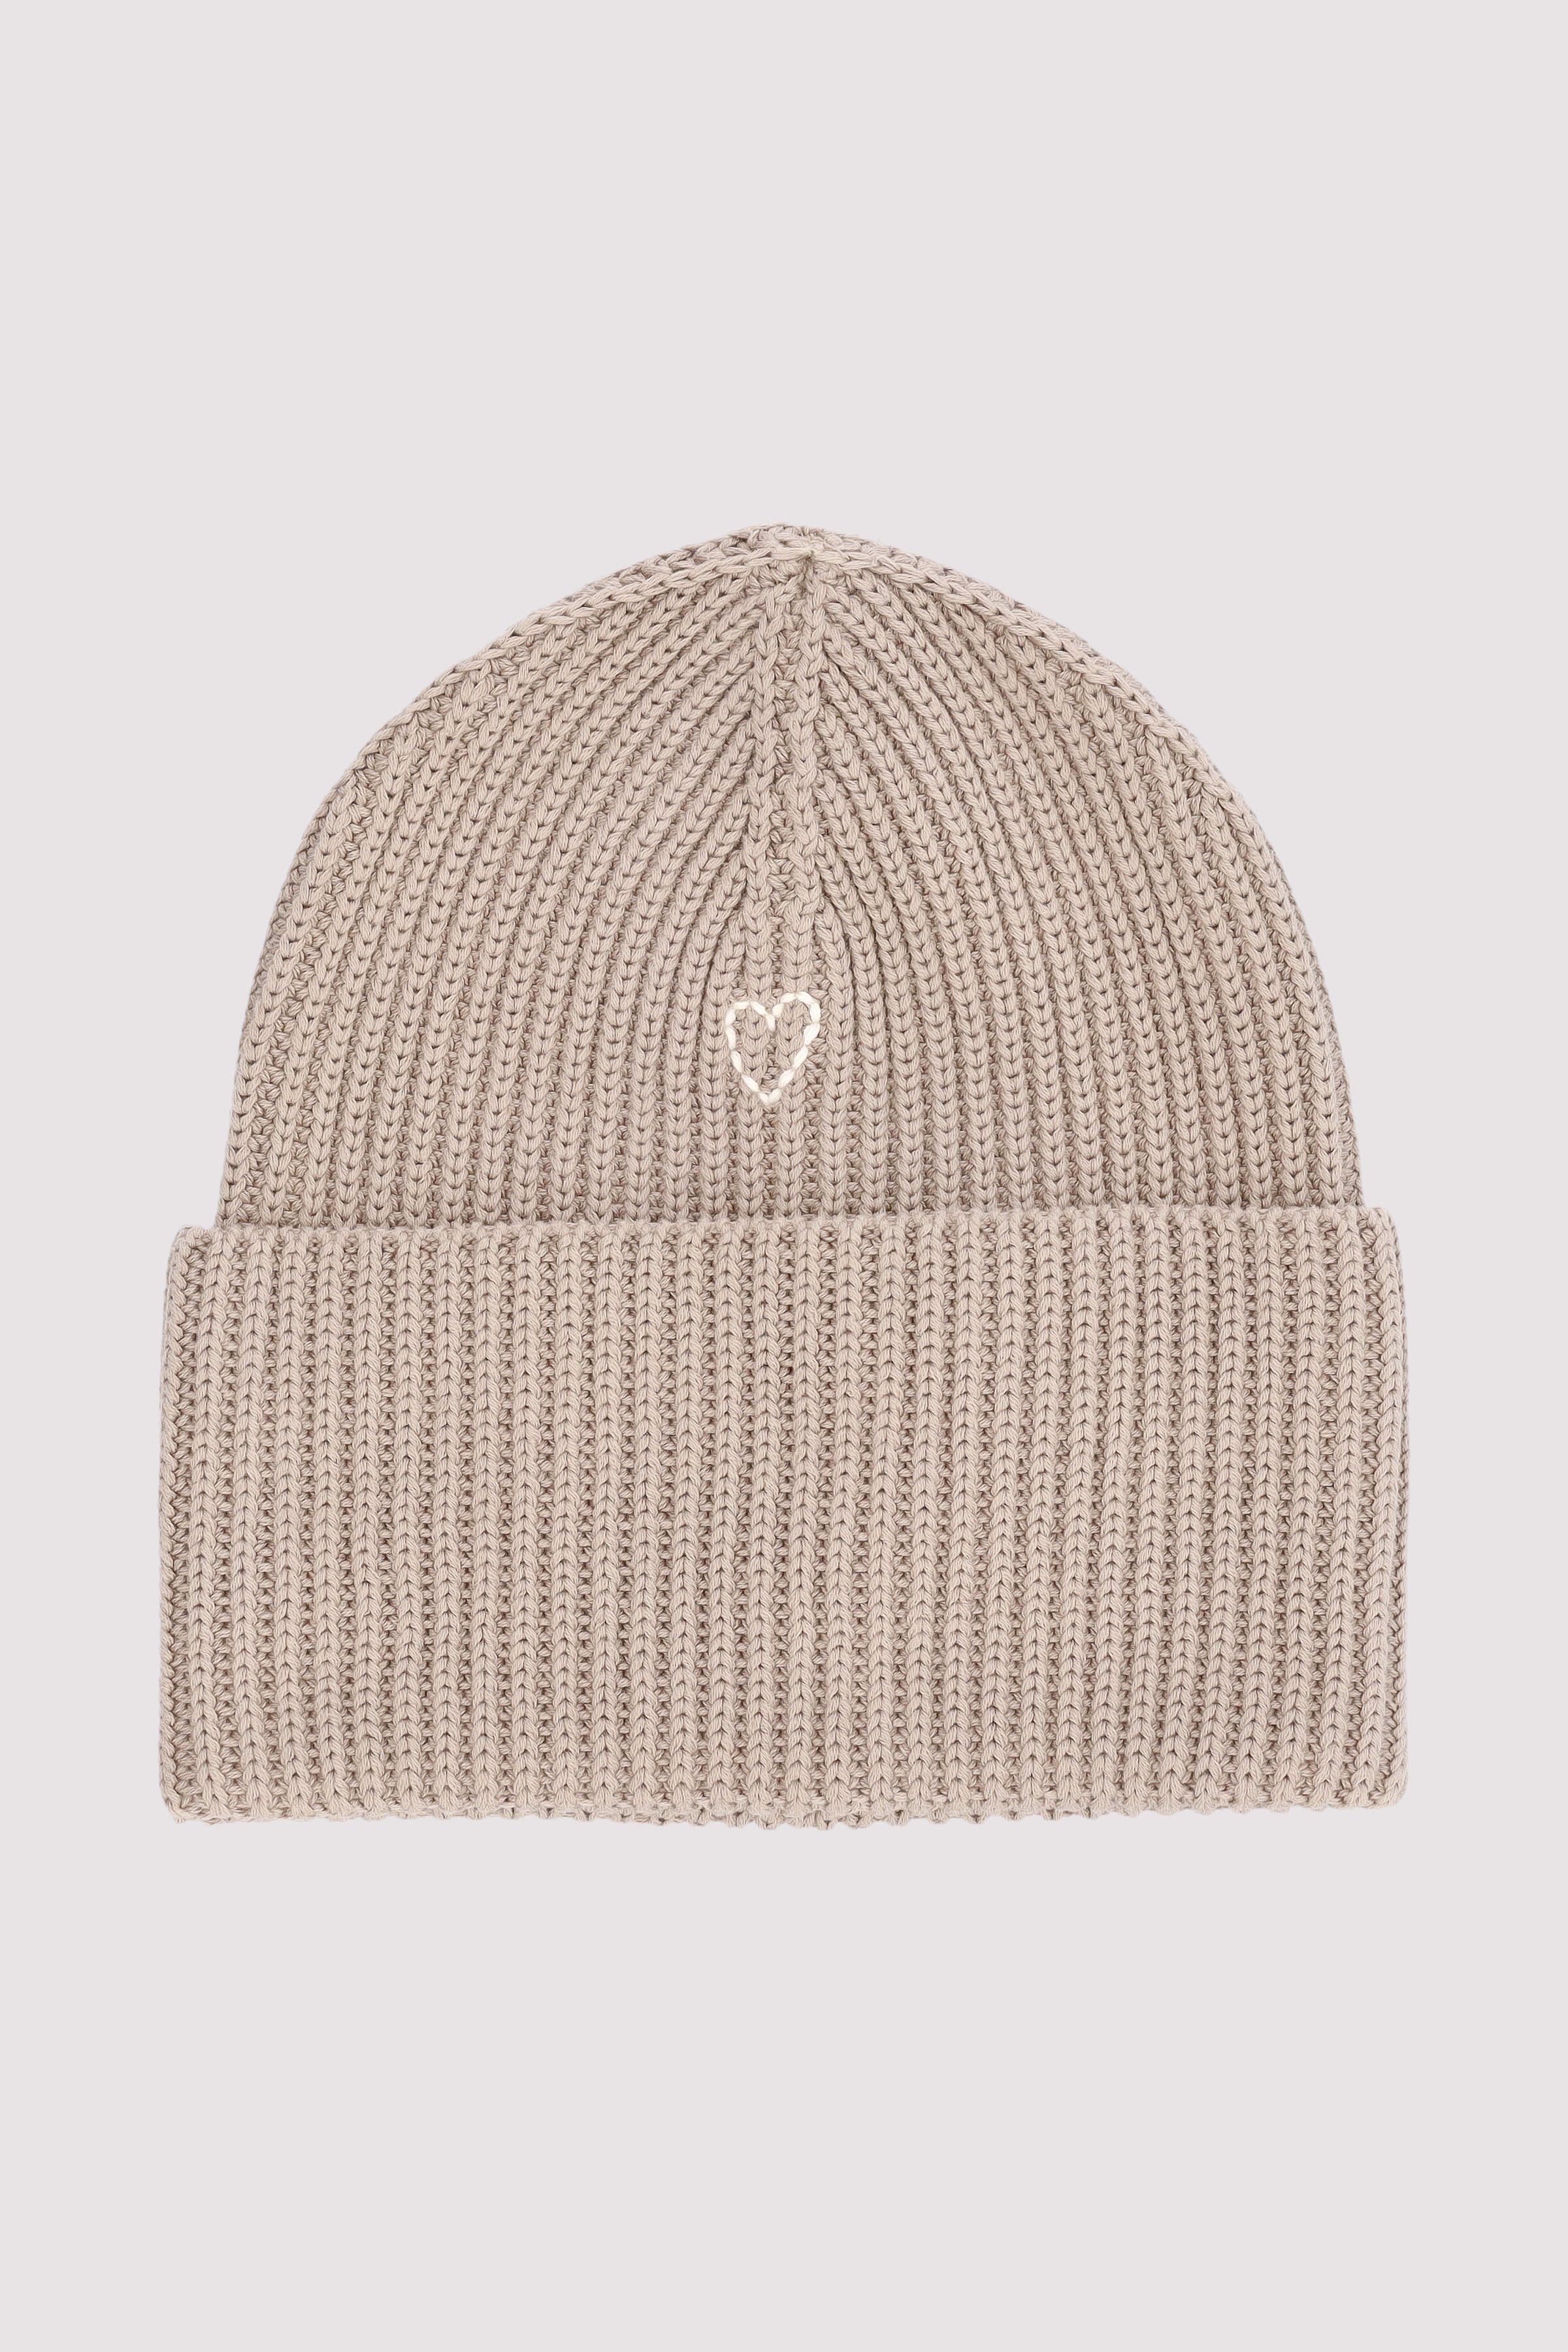 Beanie, knitted, structured wi